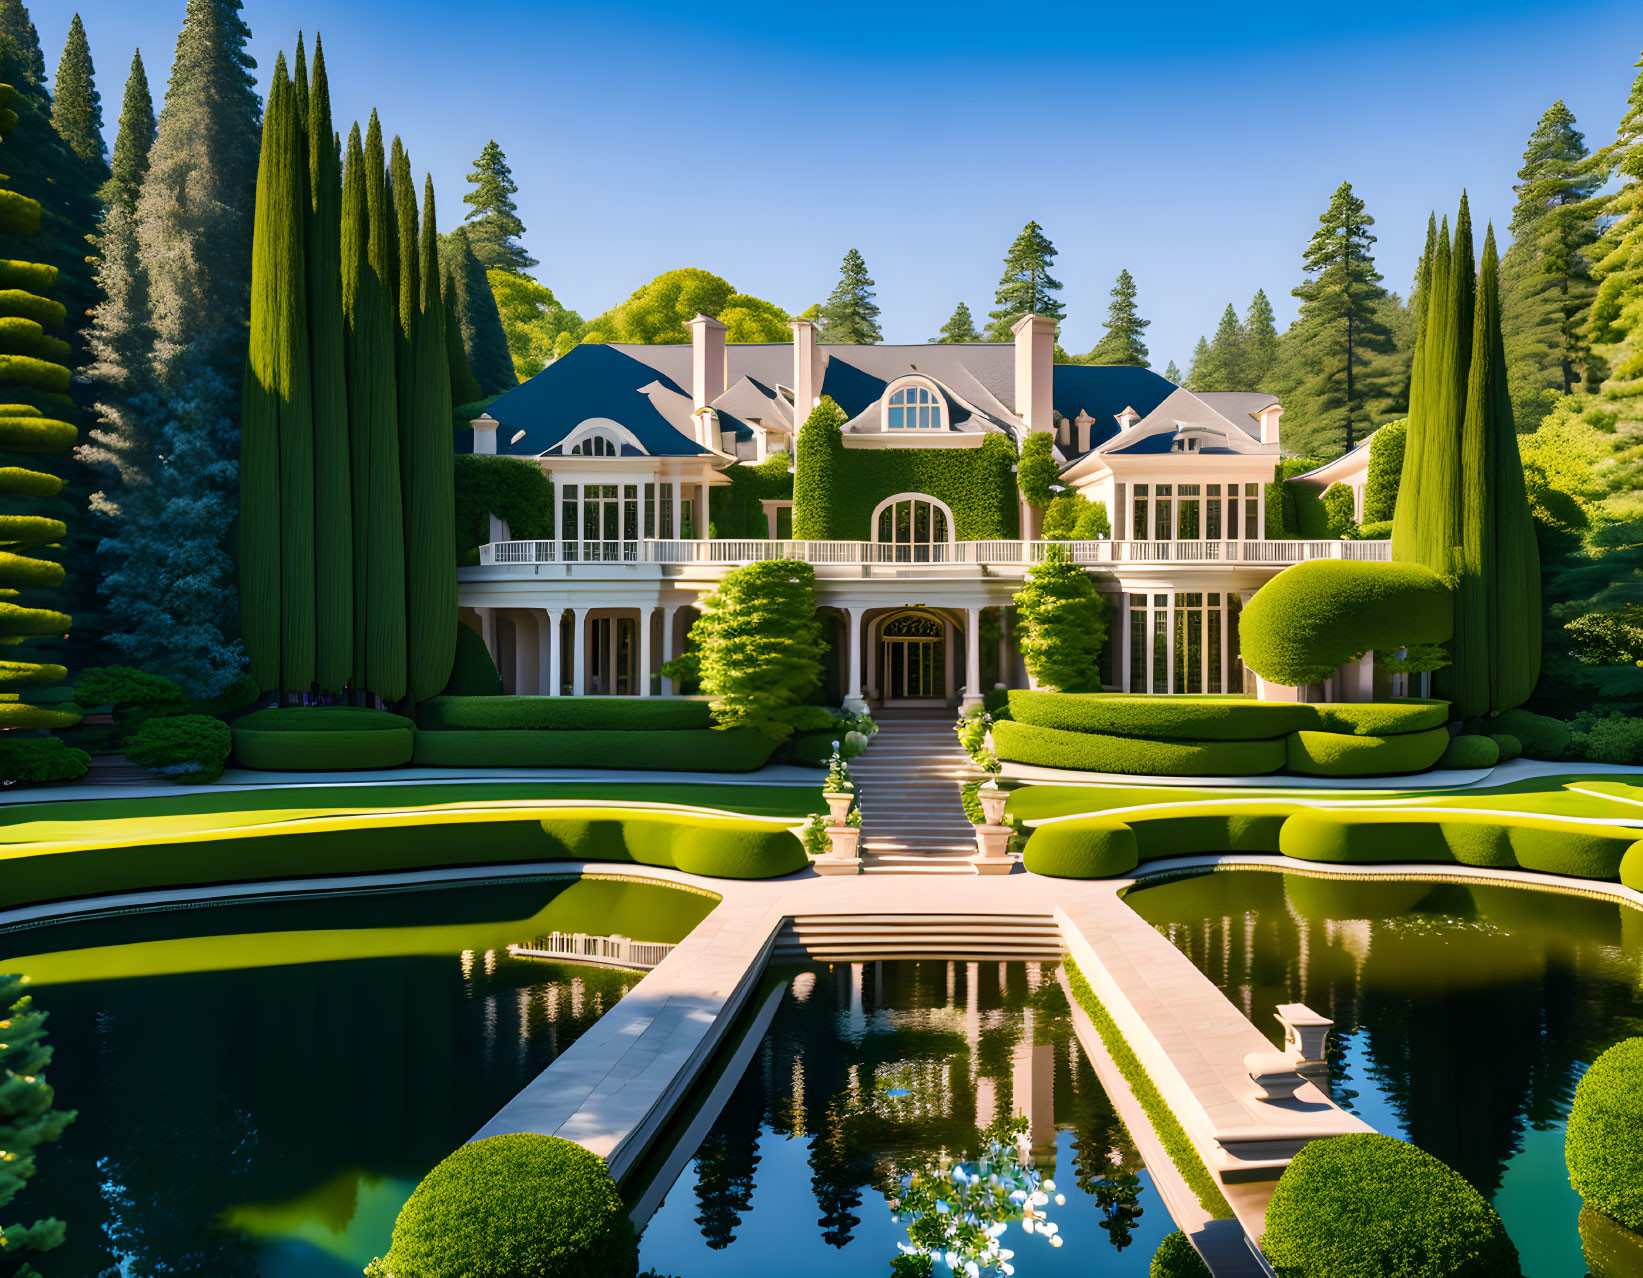 Symmetrical Topiary Garden & Reflection Pool at Luxurious Mansion